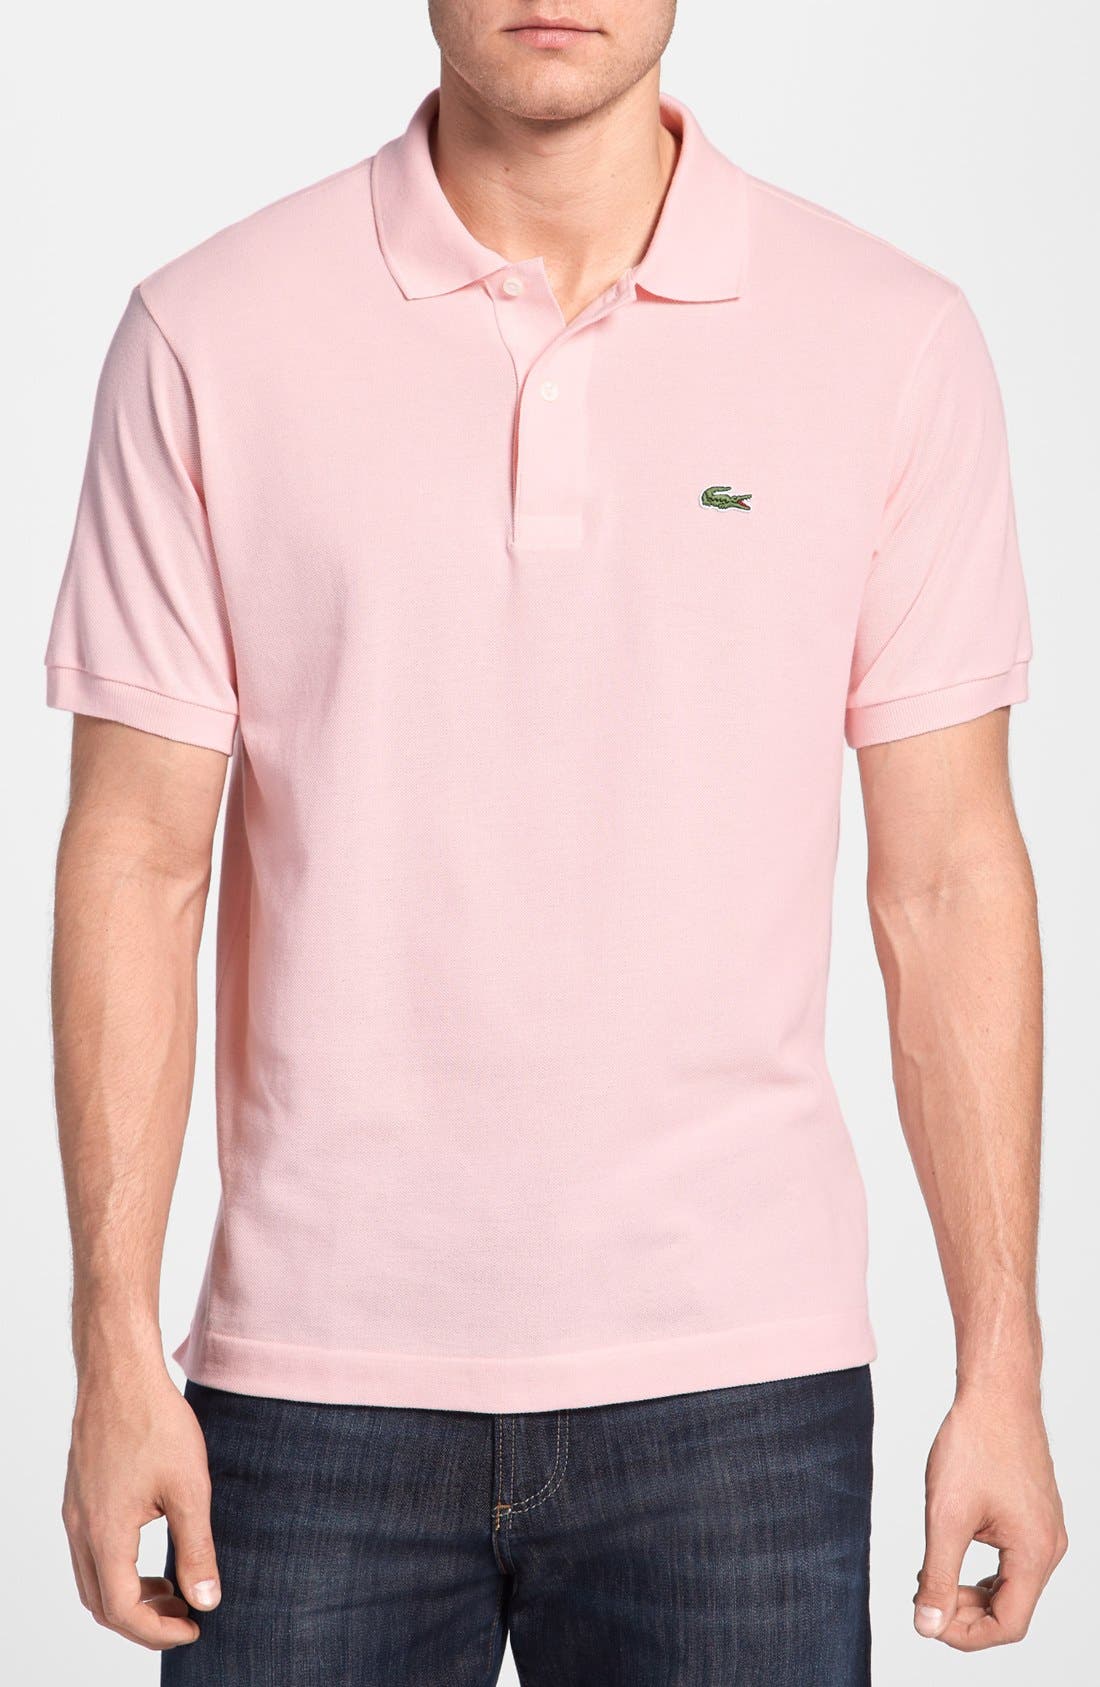 mens pink lacoste shirt